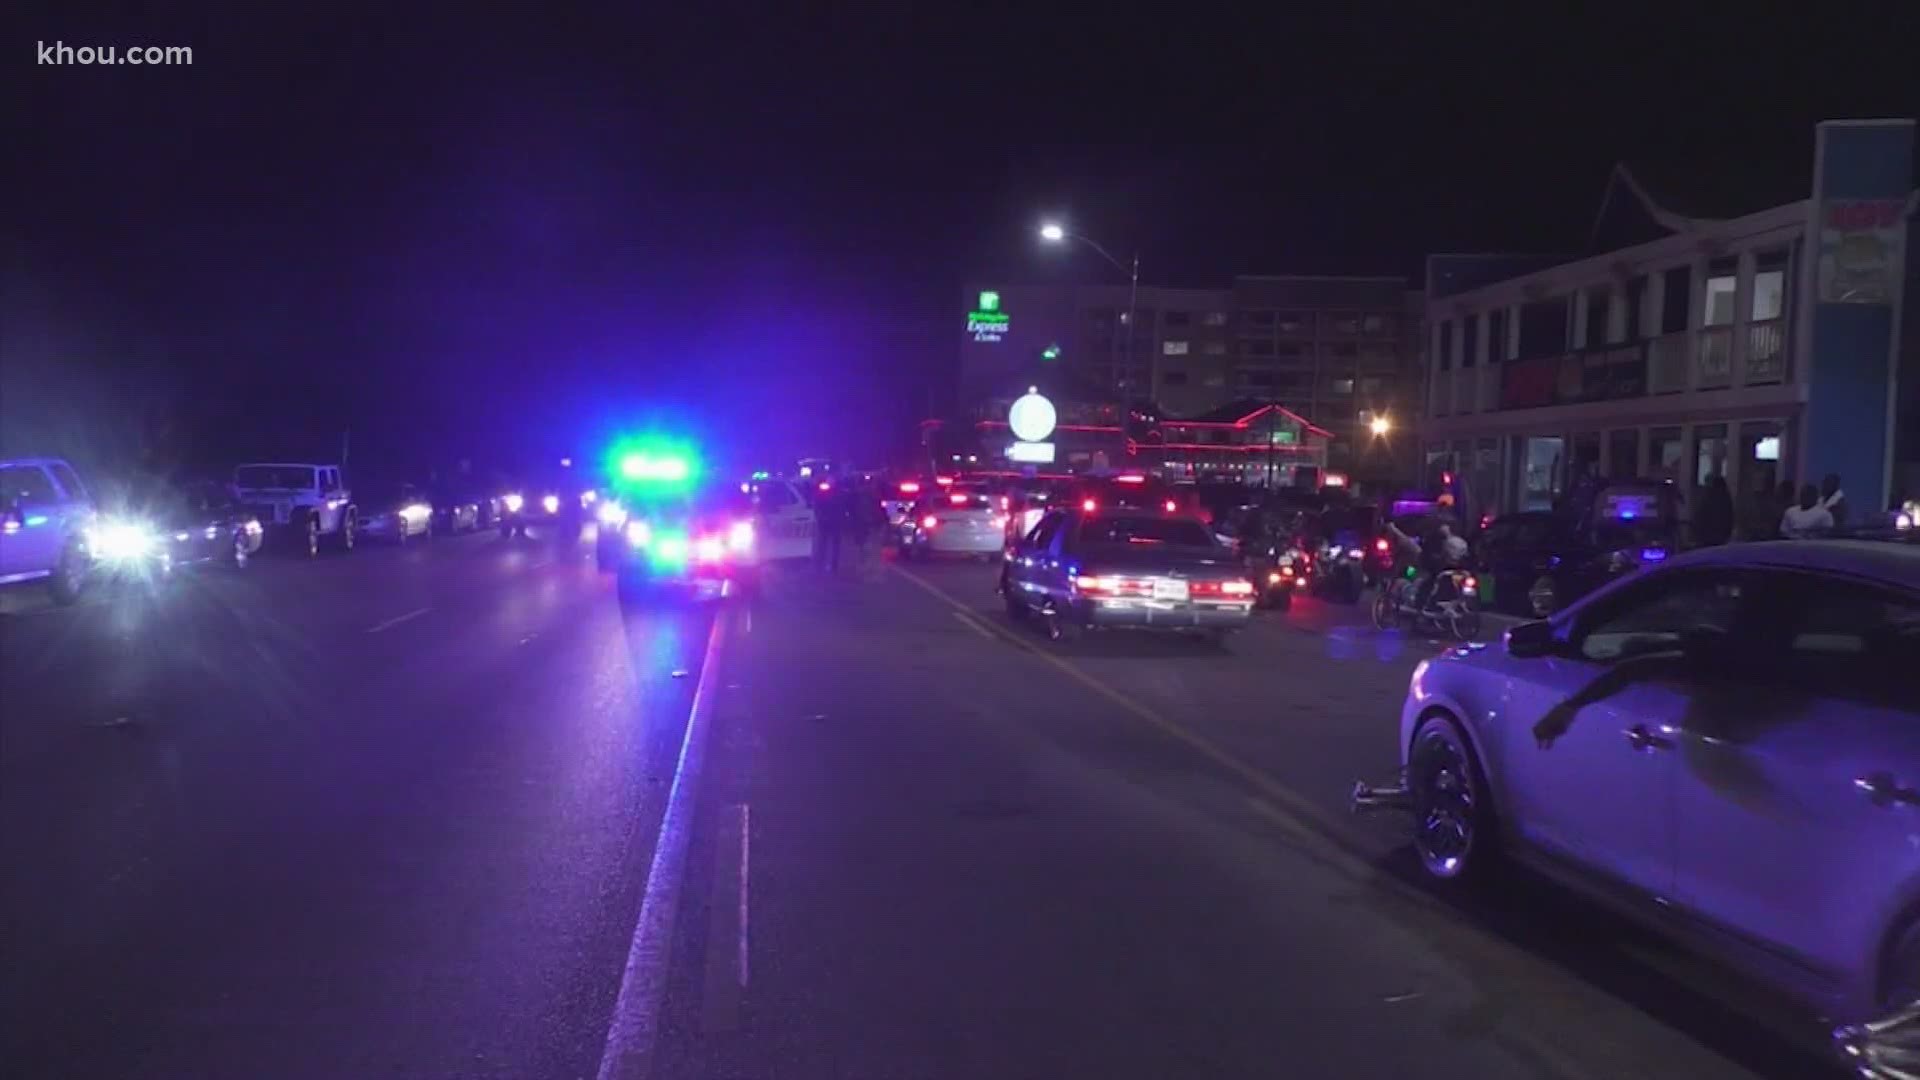 Car club events and summer gatherings led to gridlock and gunfire in Galveston on Saturday night.